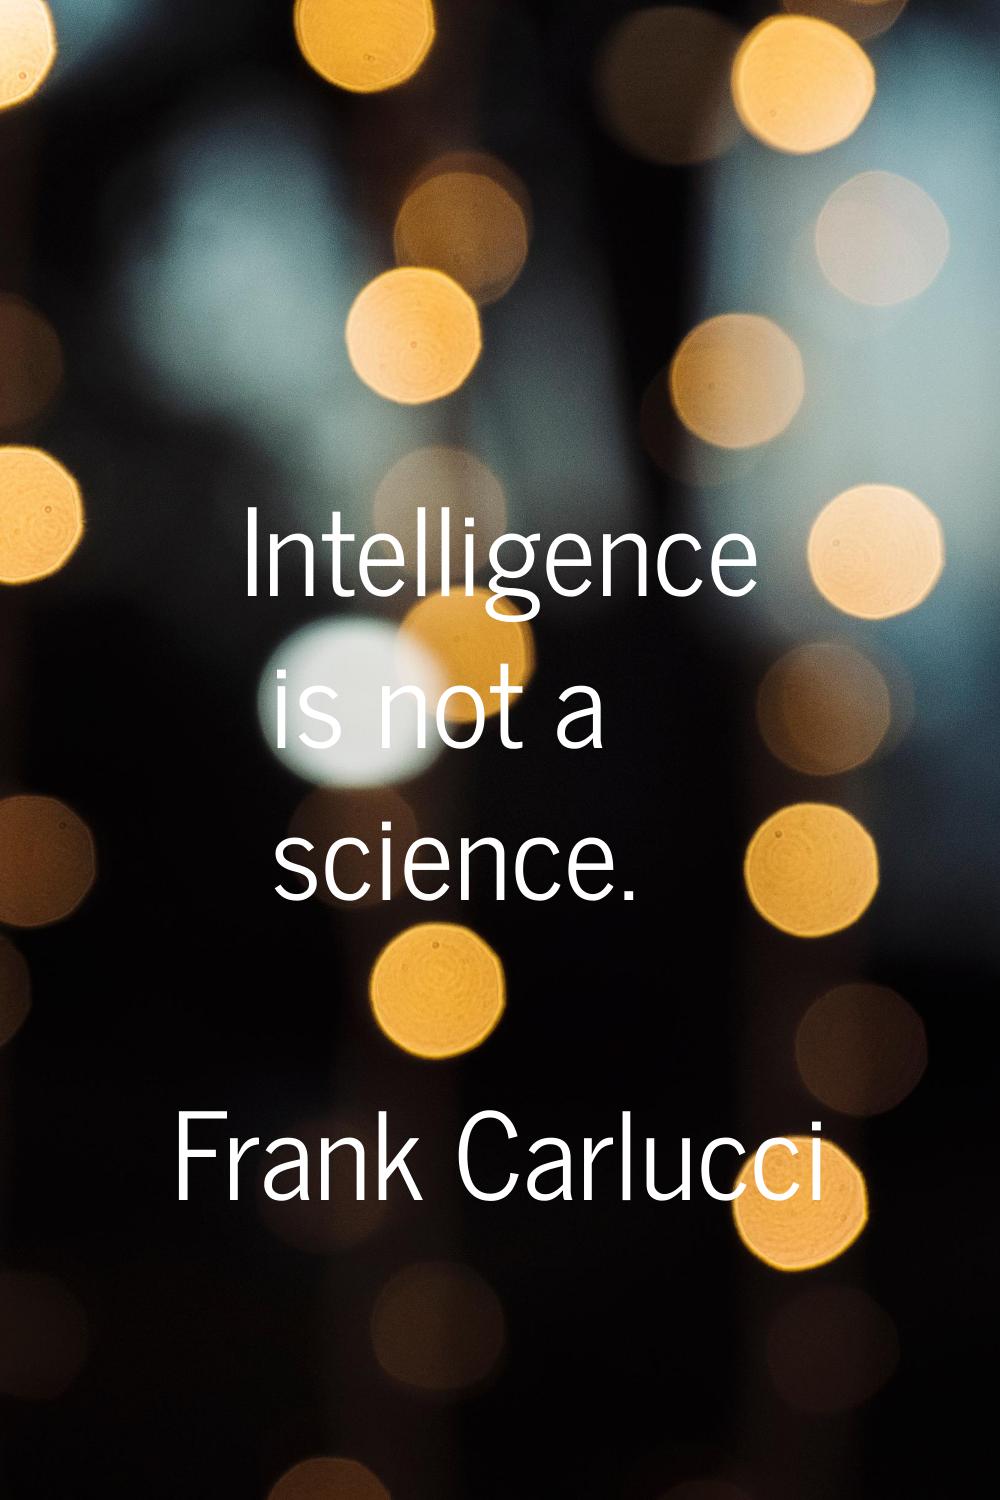 Intelligence is not a science.